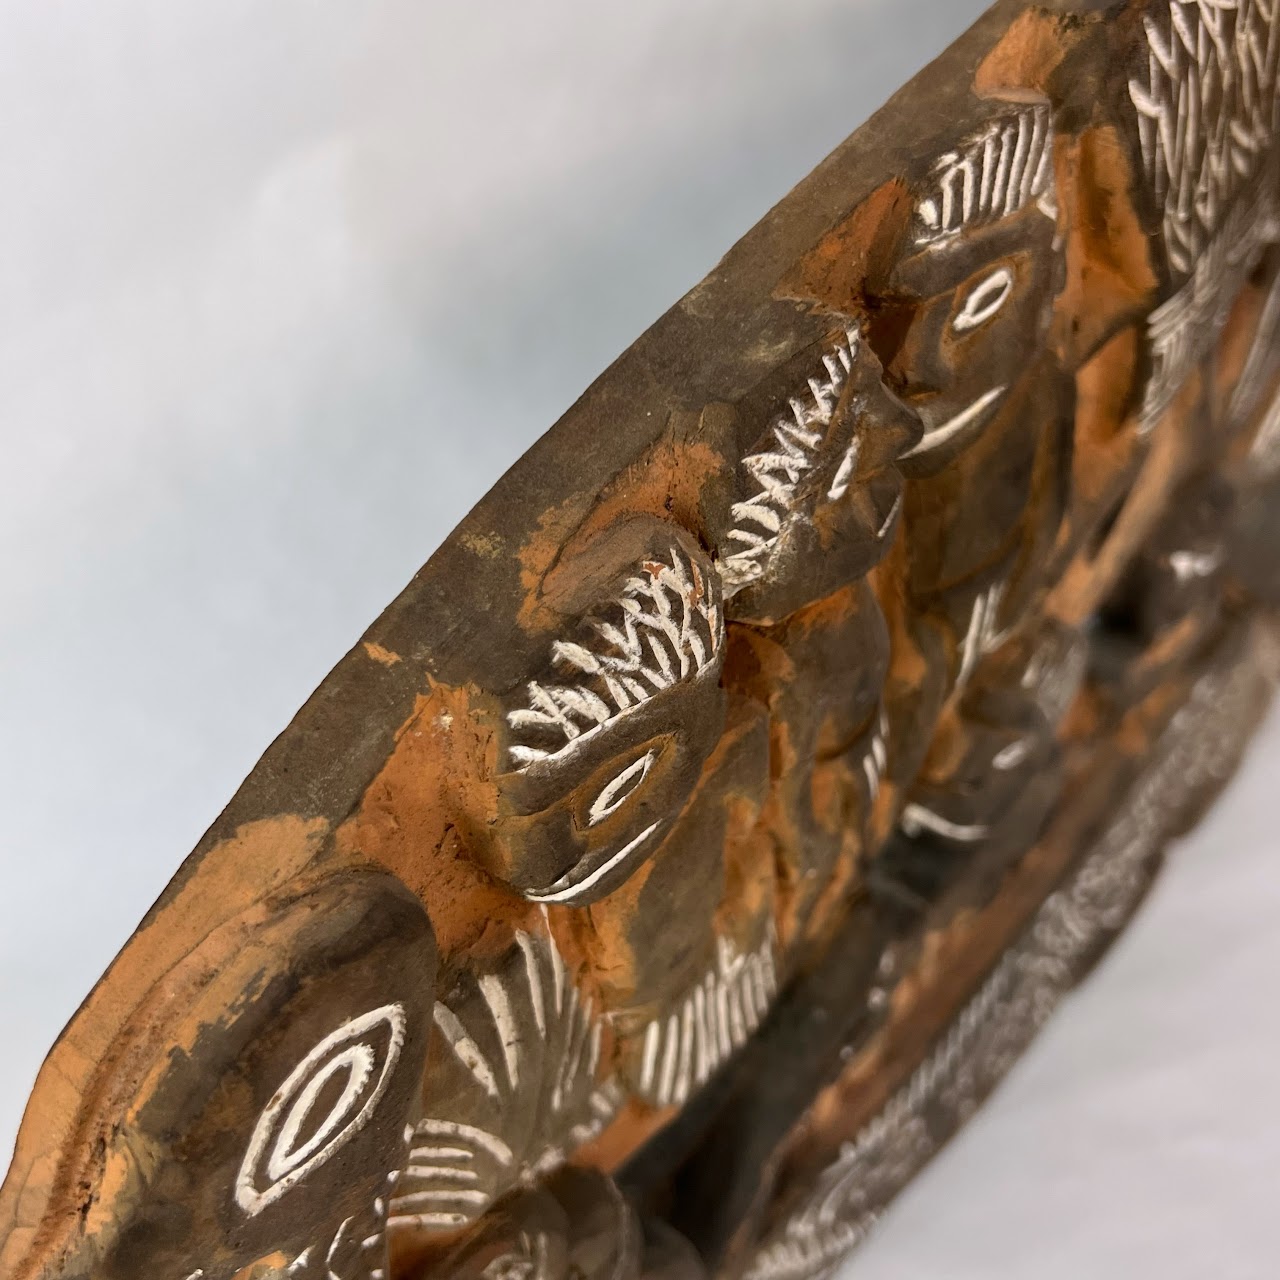 Papua New Guinean Carved Banyan Storyboard